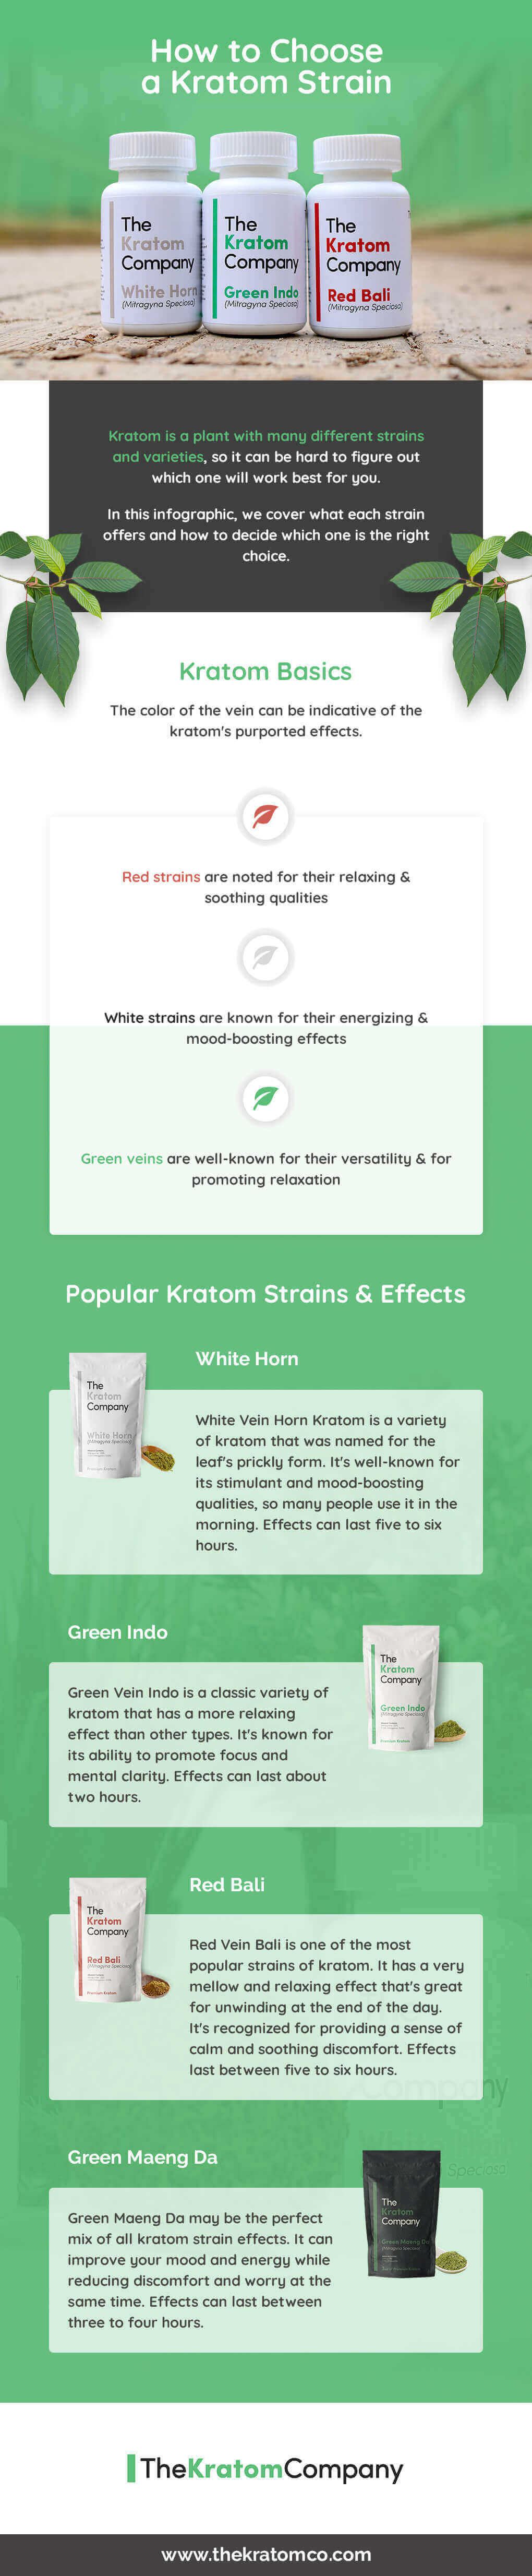 Infographic_How_To_Choose_A_Kratom_Strain_PremiumSupplements